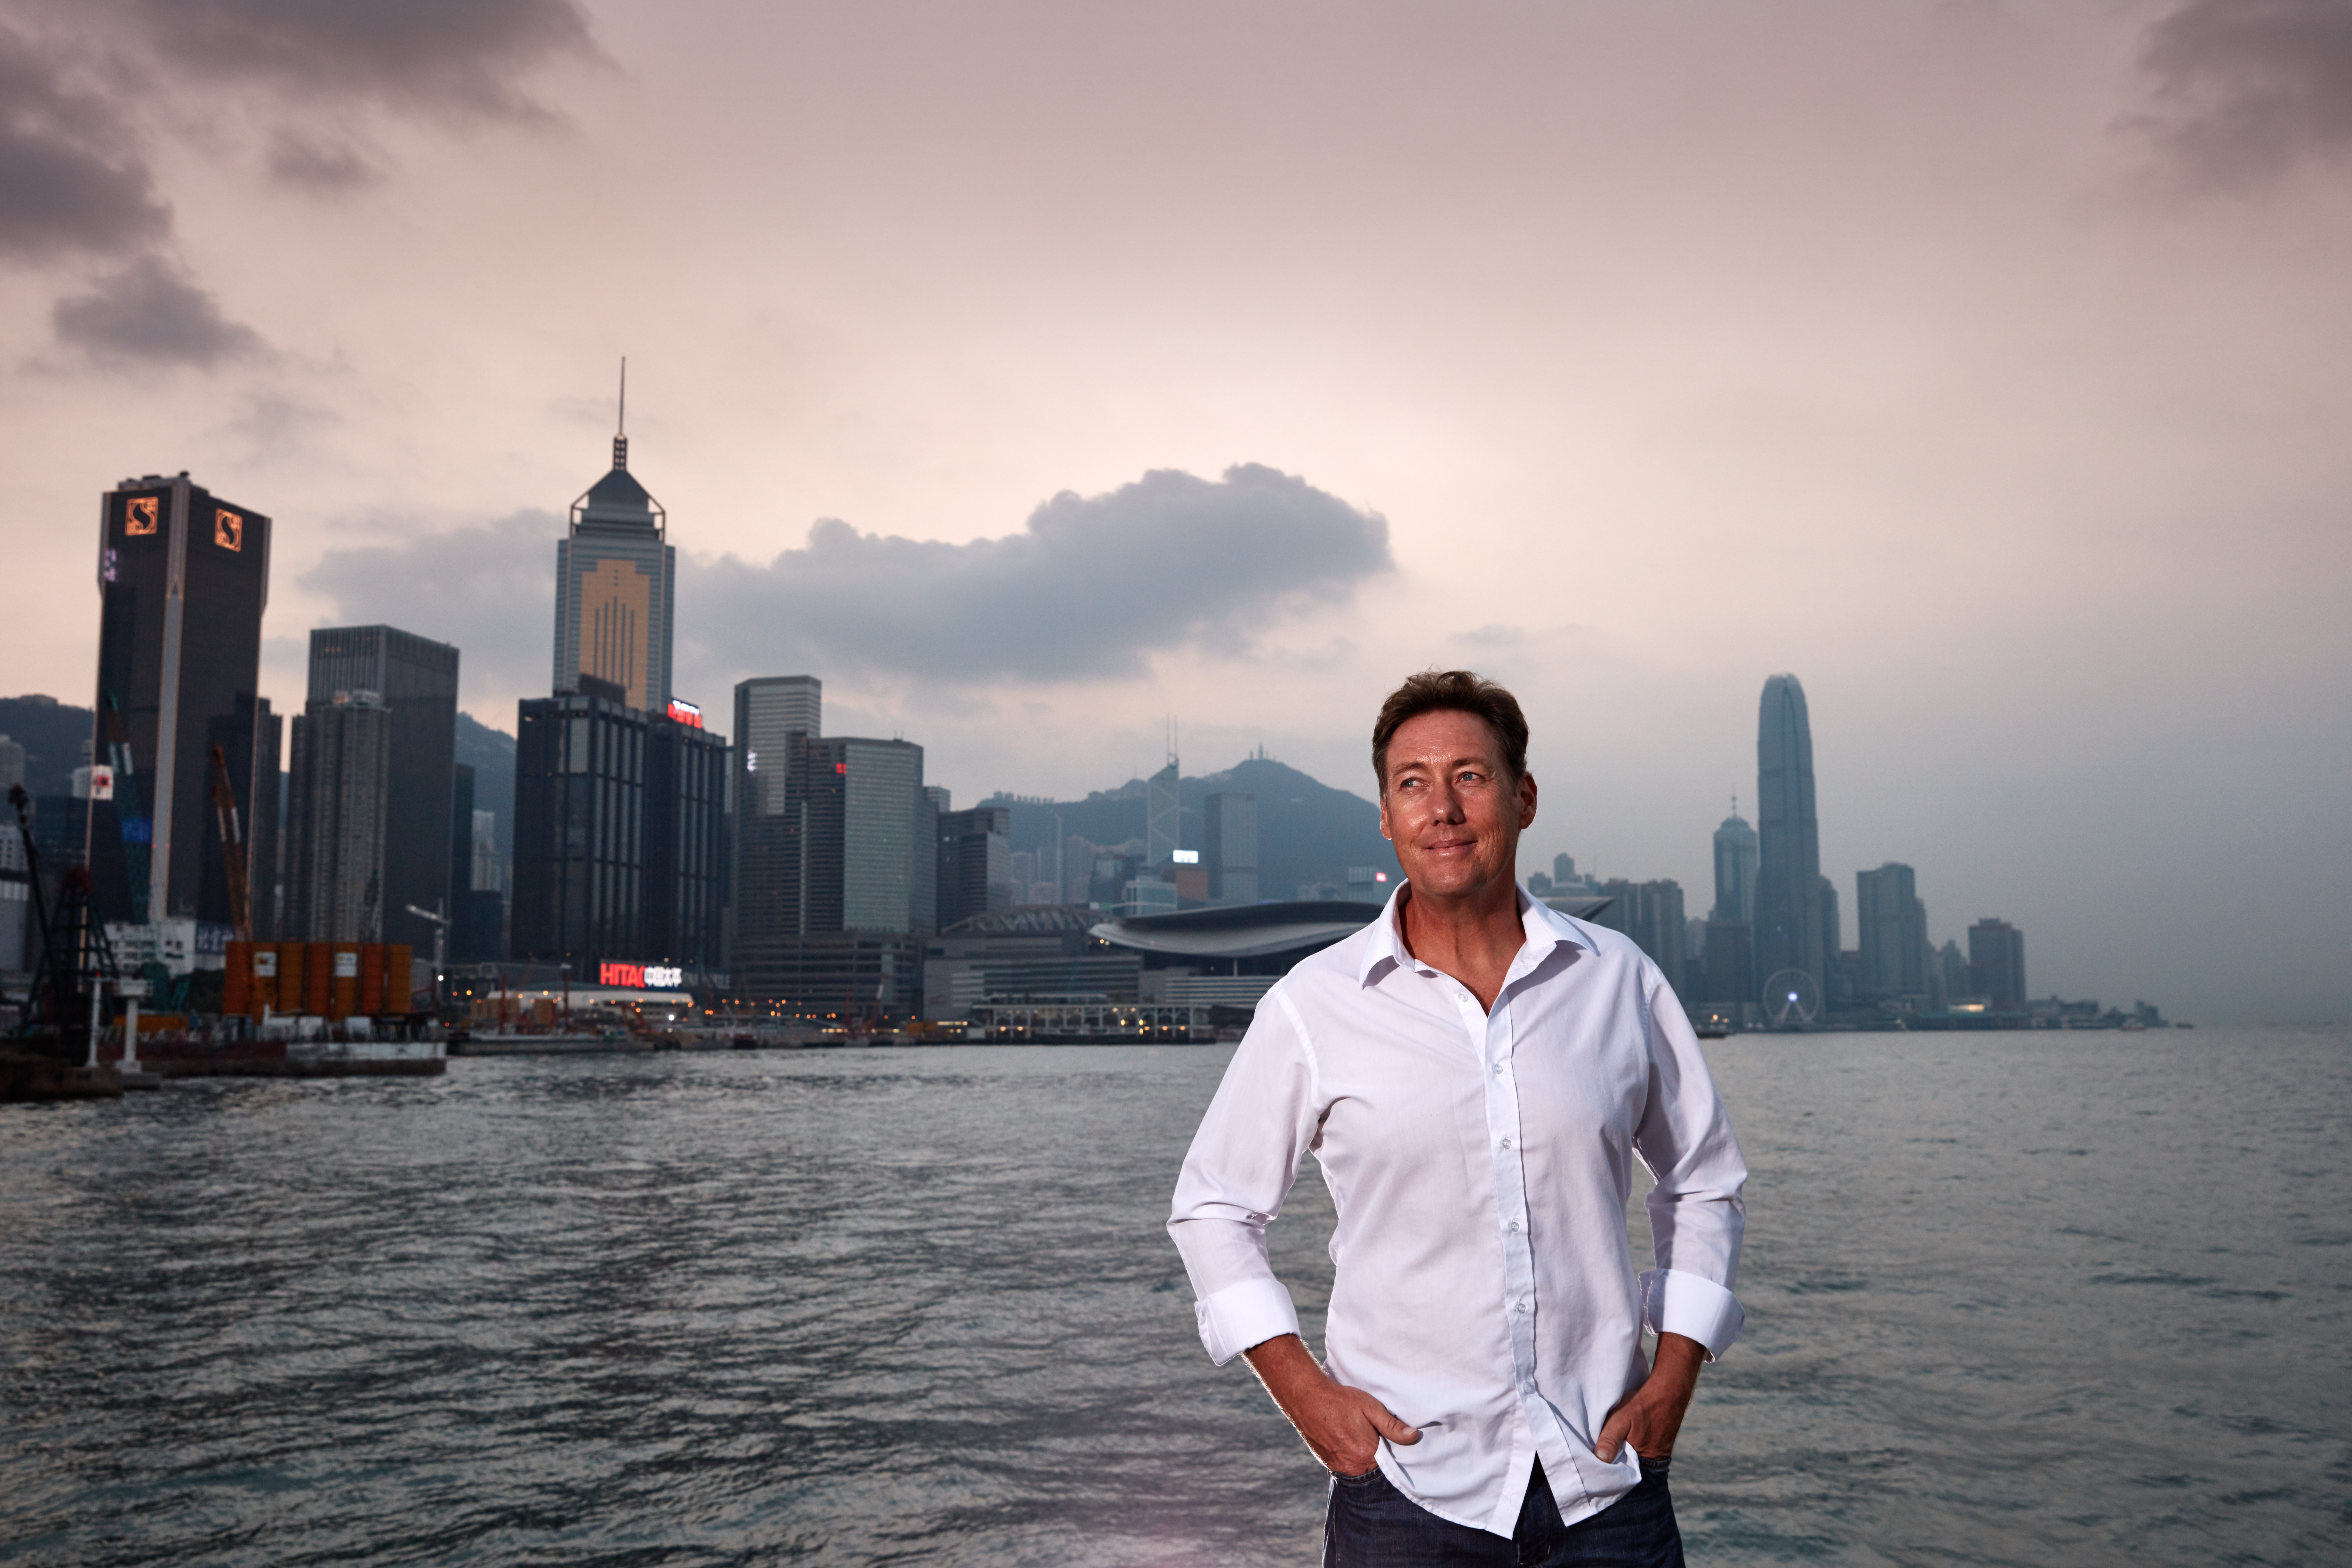 This handout image shows Nick Moloney standing in front of the Hong Kong skyline at dusk the evening before he sets off for Macau in the inaugural The St. Regis Macao Cup attempt. 23NOV15 [online] PHOTO / Dominic James